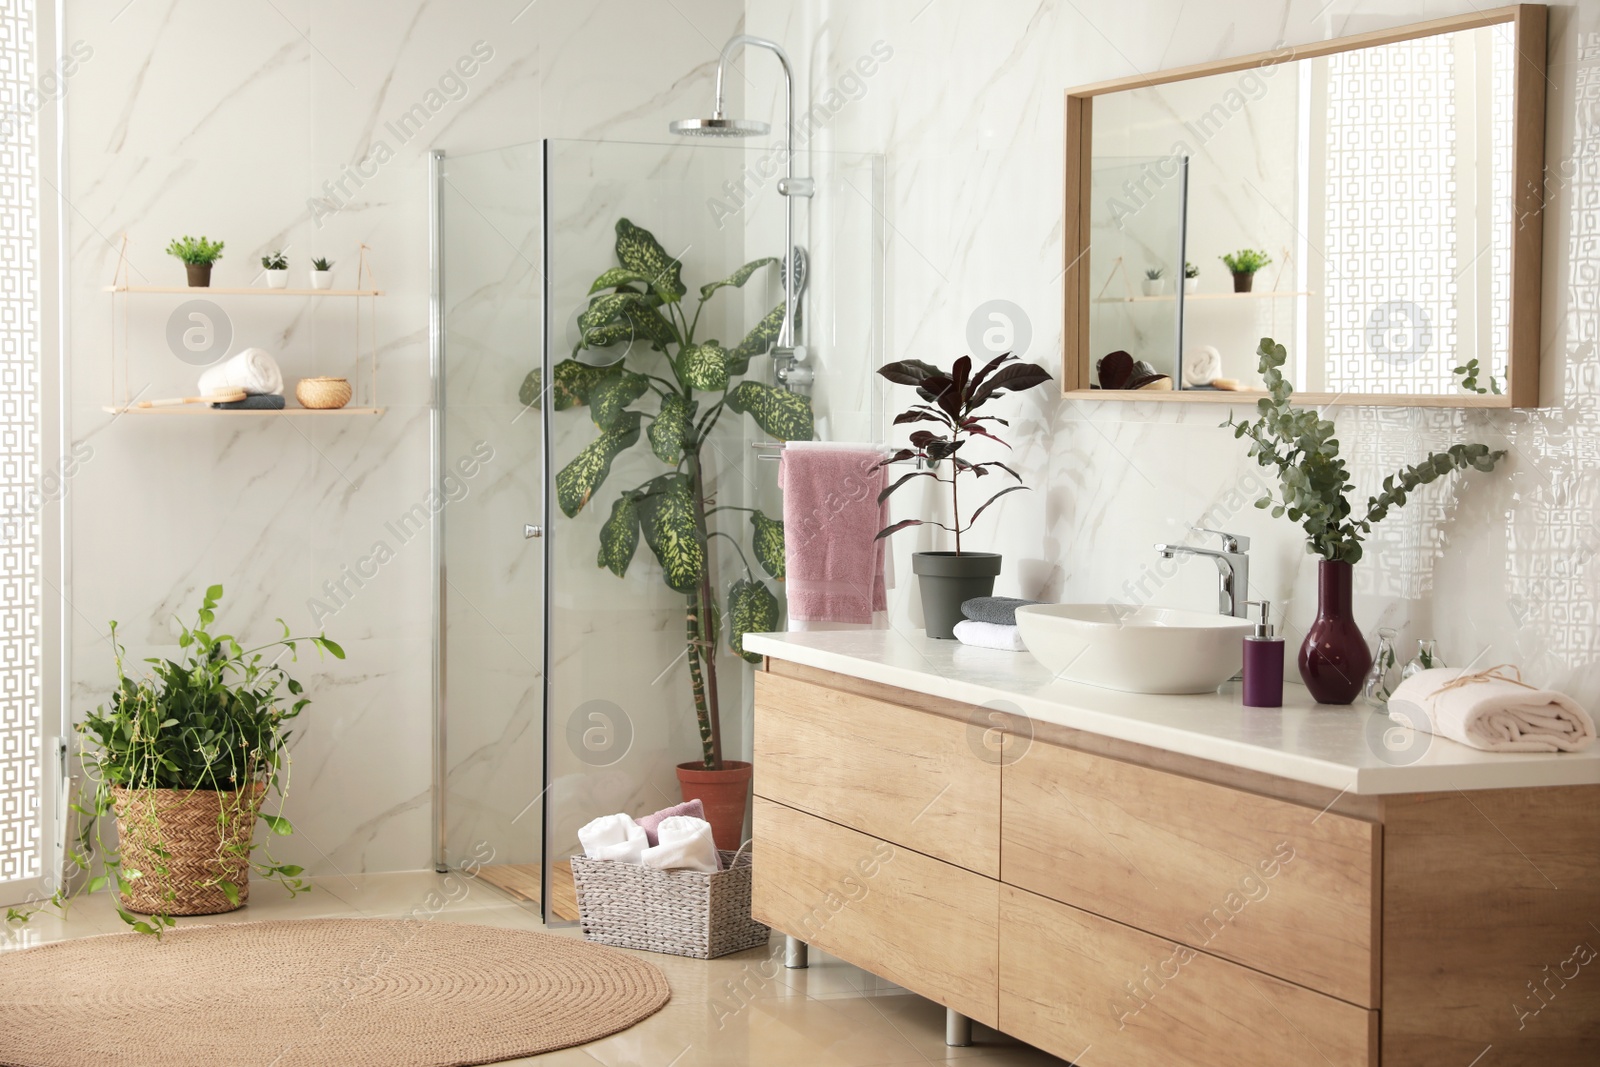 Photo of Stylish bathroom interior with countertop, shower stall and houseplants. Design idea